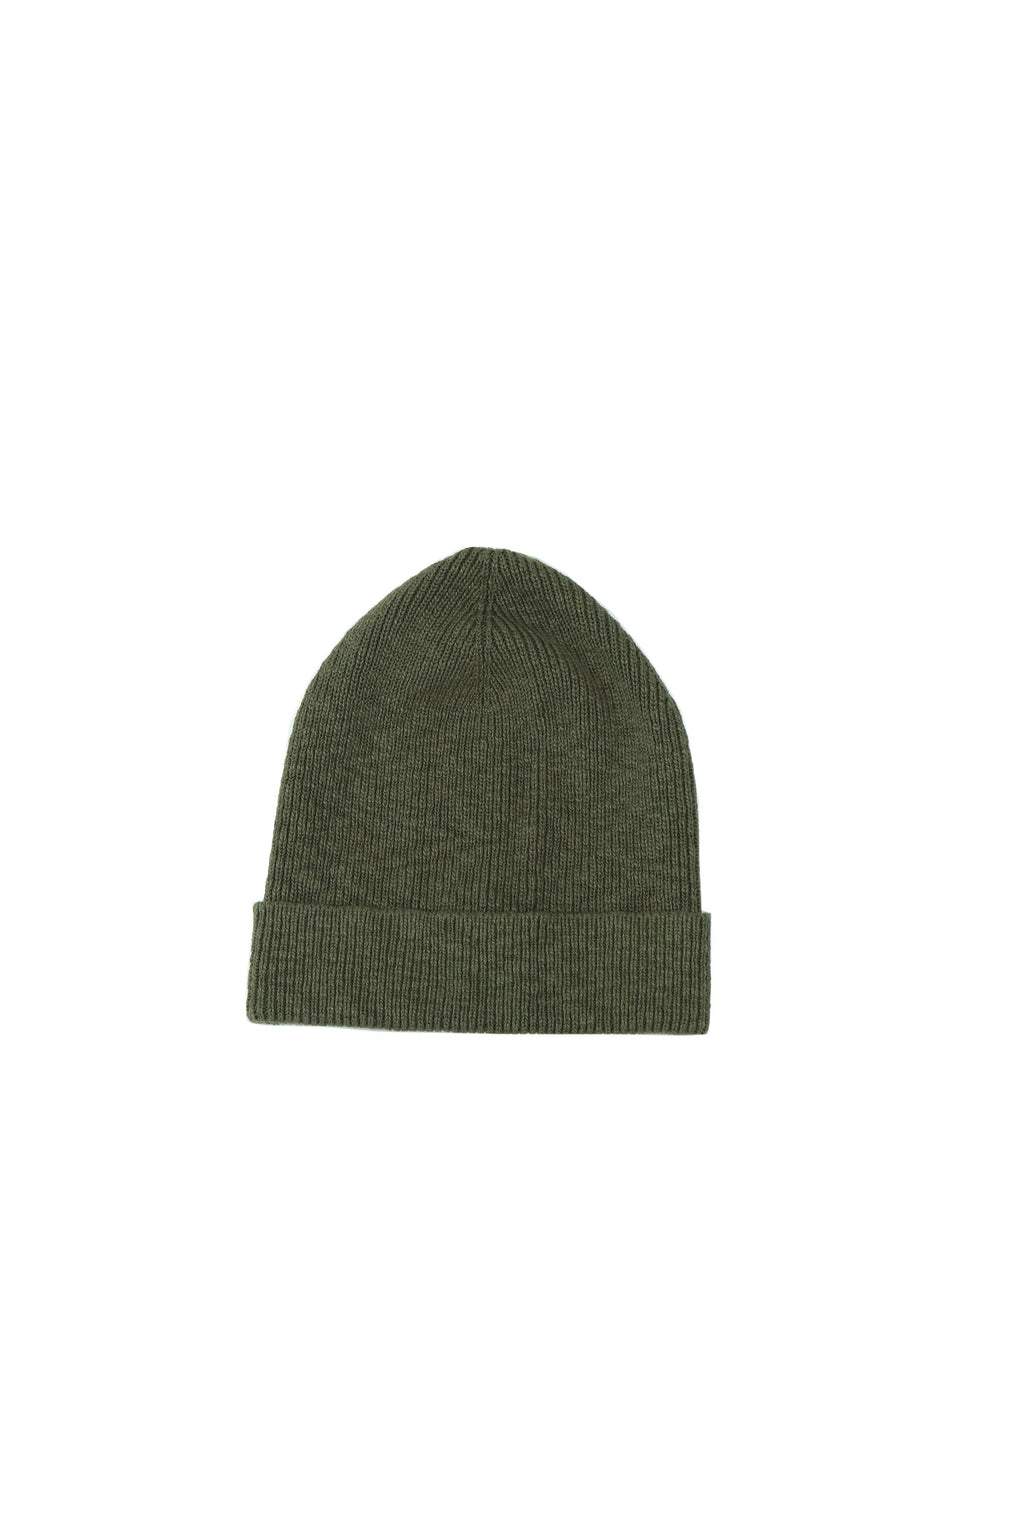 Ribbed Beanie in Olive